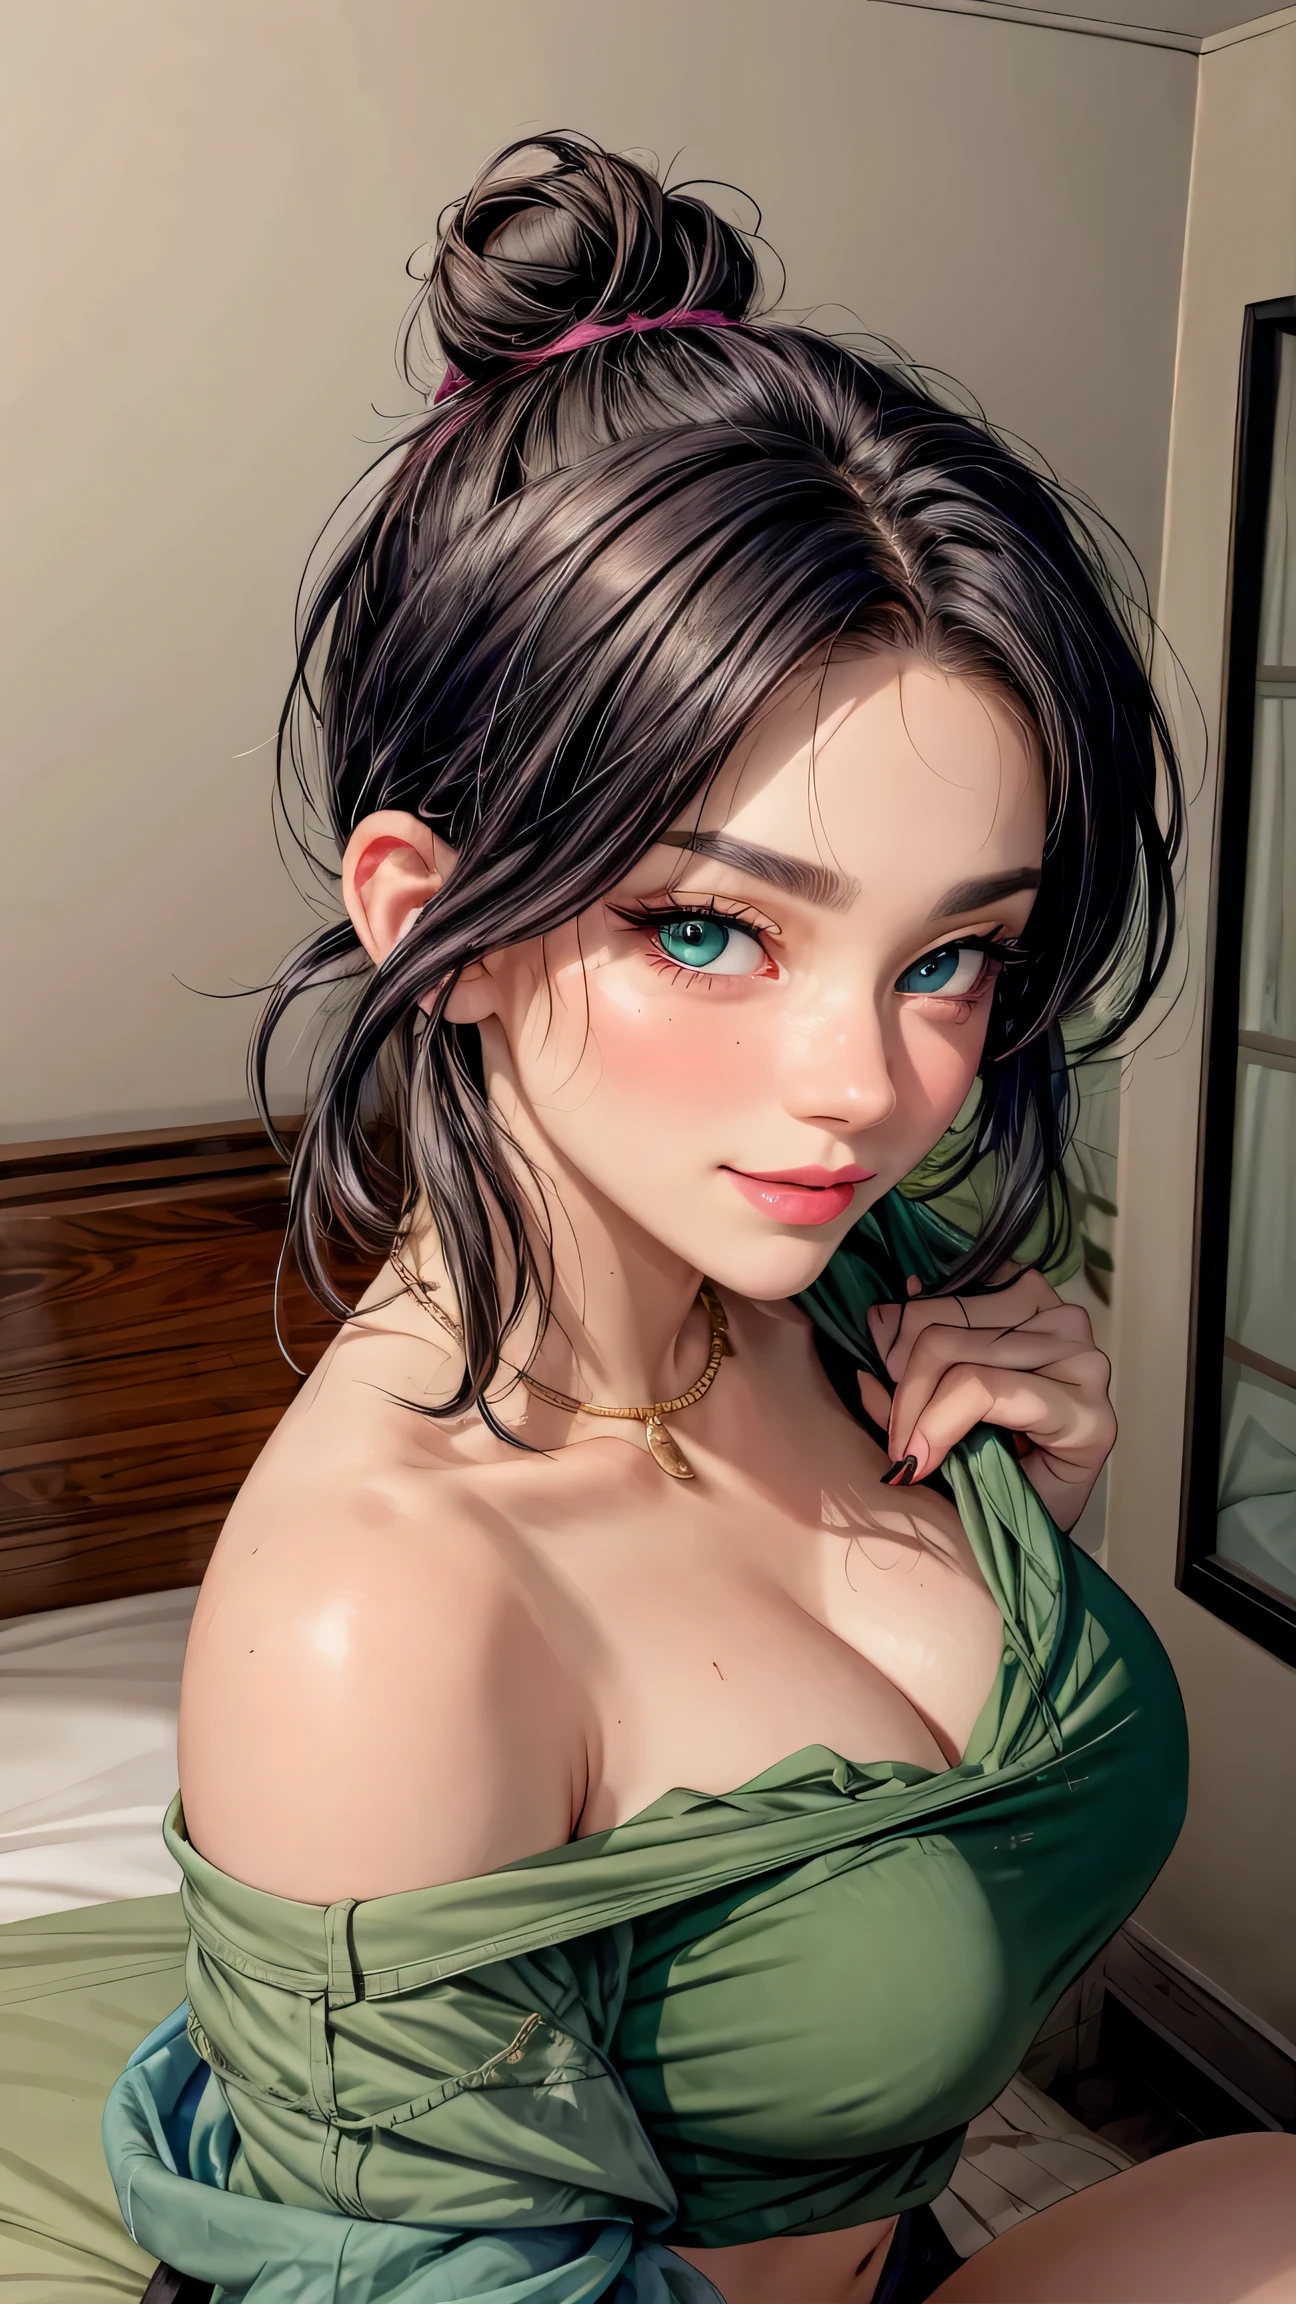 Amazing portrait of a sexy woman with a beautiful face with lustful eyes gazing seductively and parted pink lips smiling as she blushed deeply with her black hair in a bun wearing a green satin shirt that is partially unbuttoned and falling off her shoulders exposing her creamy pale porcelain skin in a very dimly lit bedroom giving off an intimate vibe